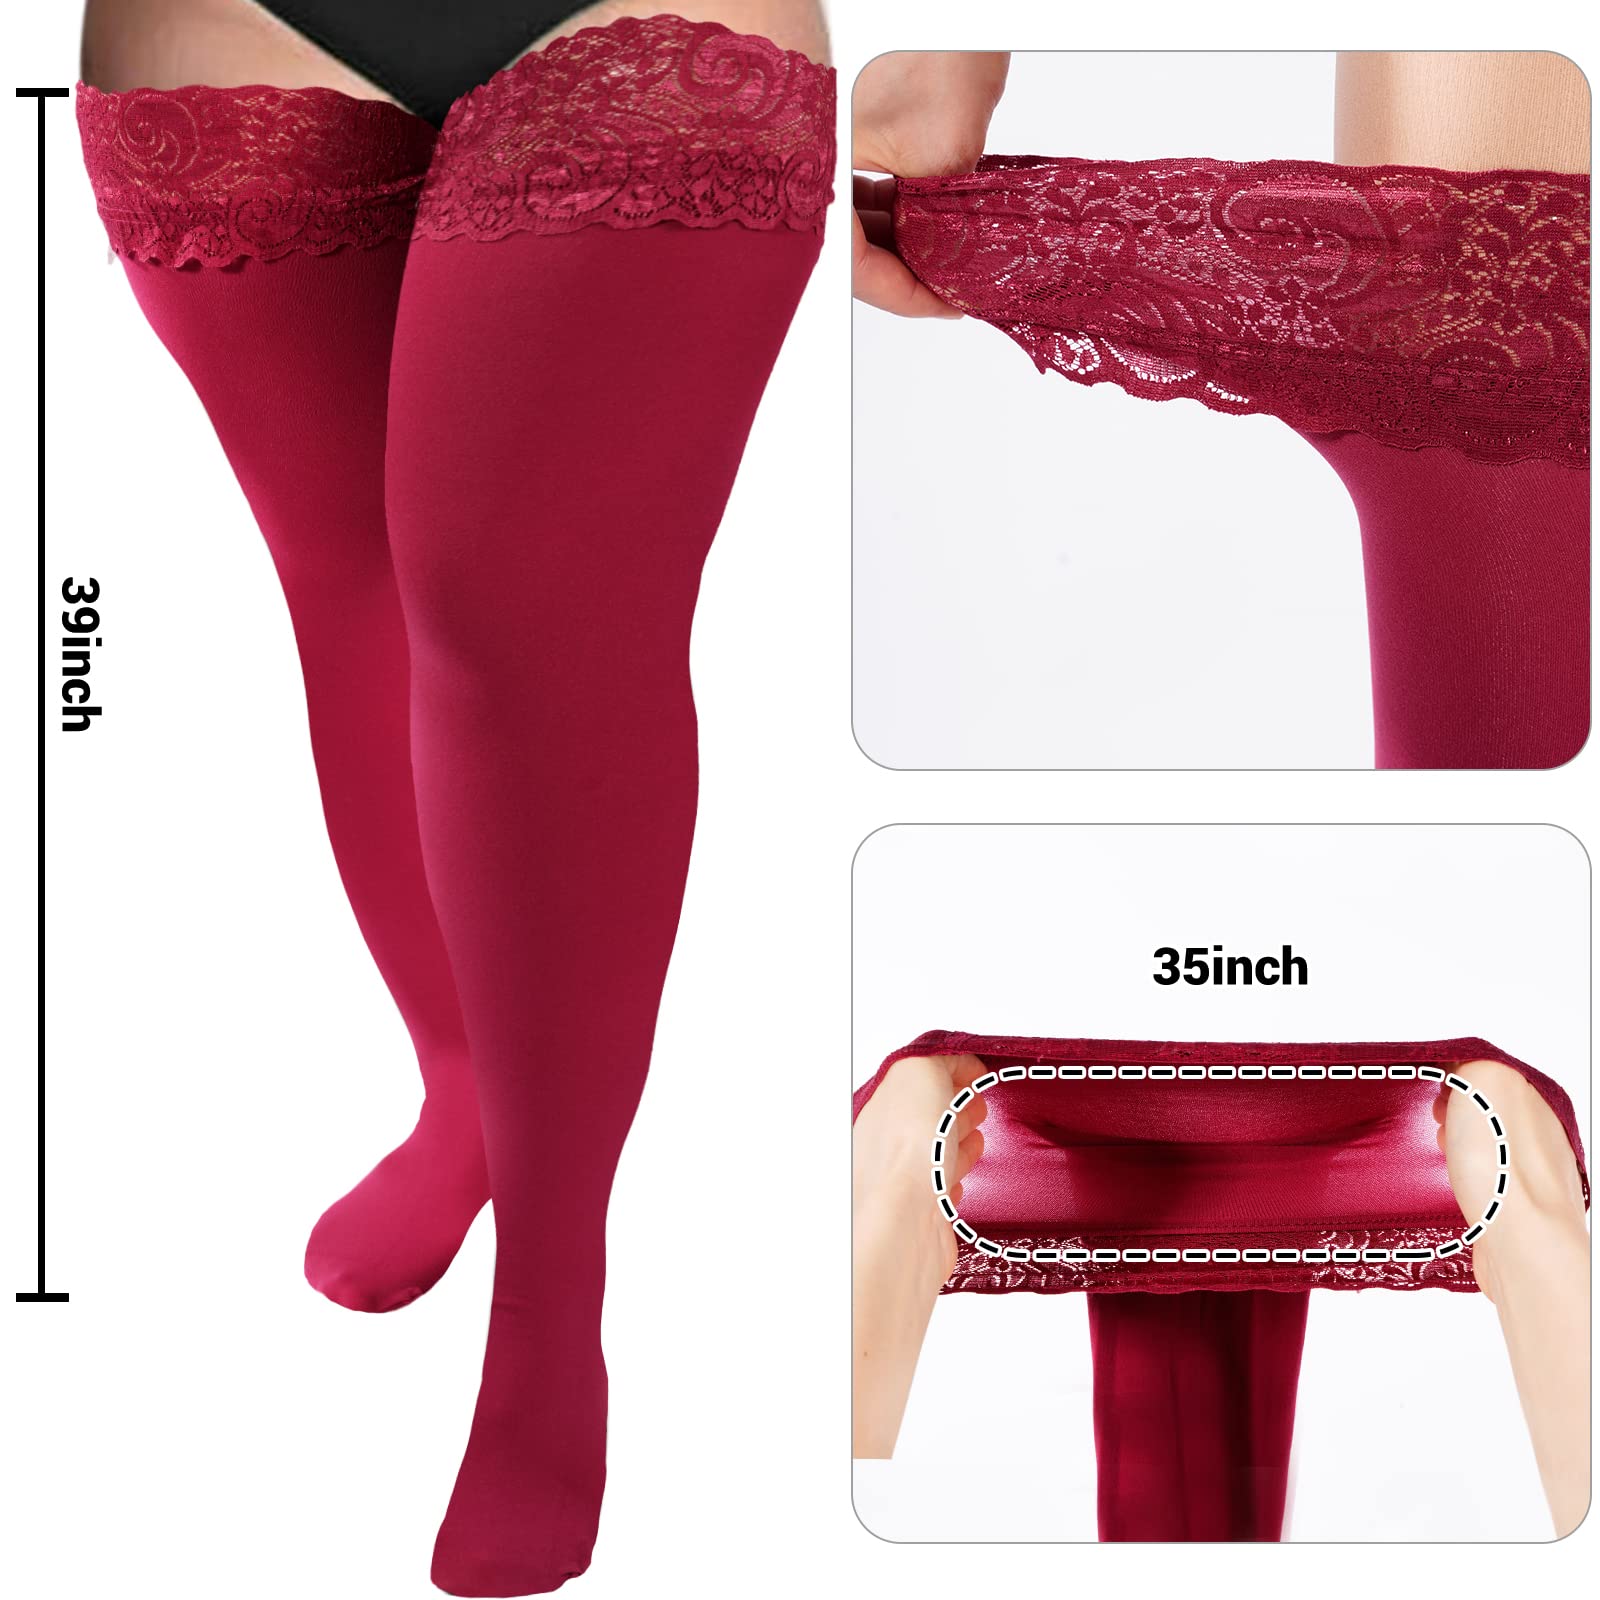 55D Semi Sheer Silicone Lace Stay Up Thigh Highs Pantyhose-Burgundy - Moon Wood